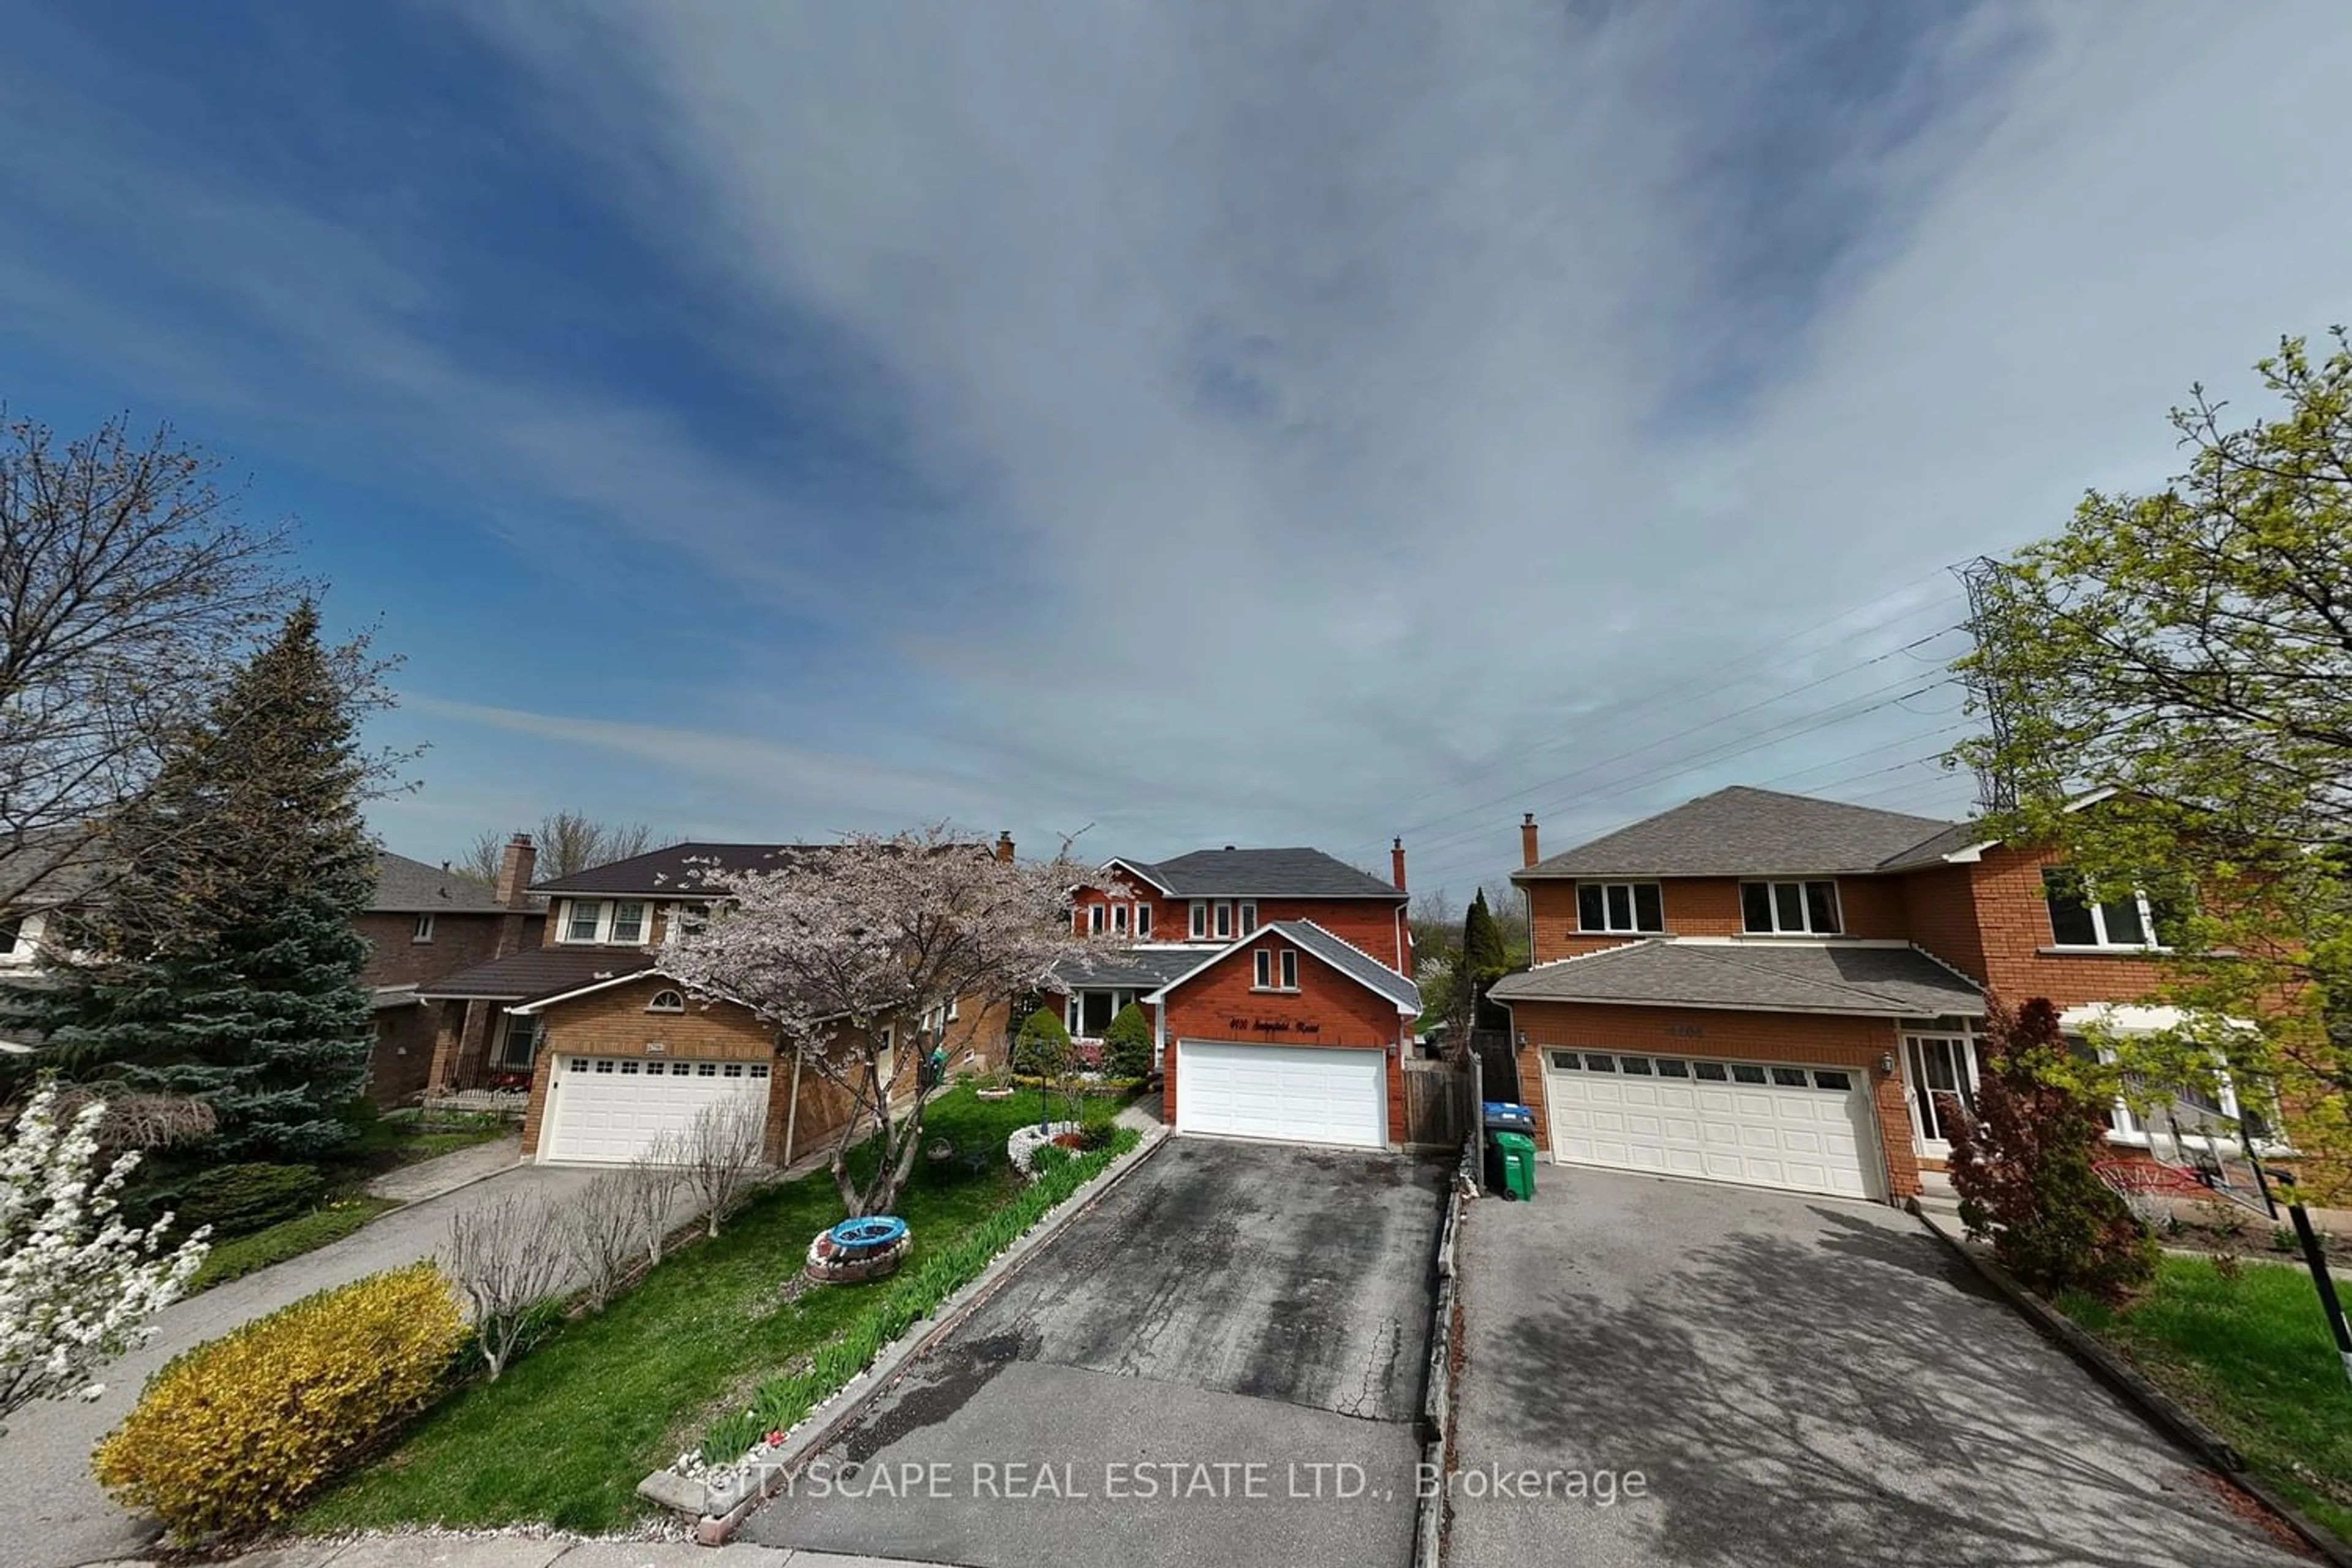 Street view for 4400 Sedgefield Rd, Mississauga Ontario L5M 3B4